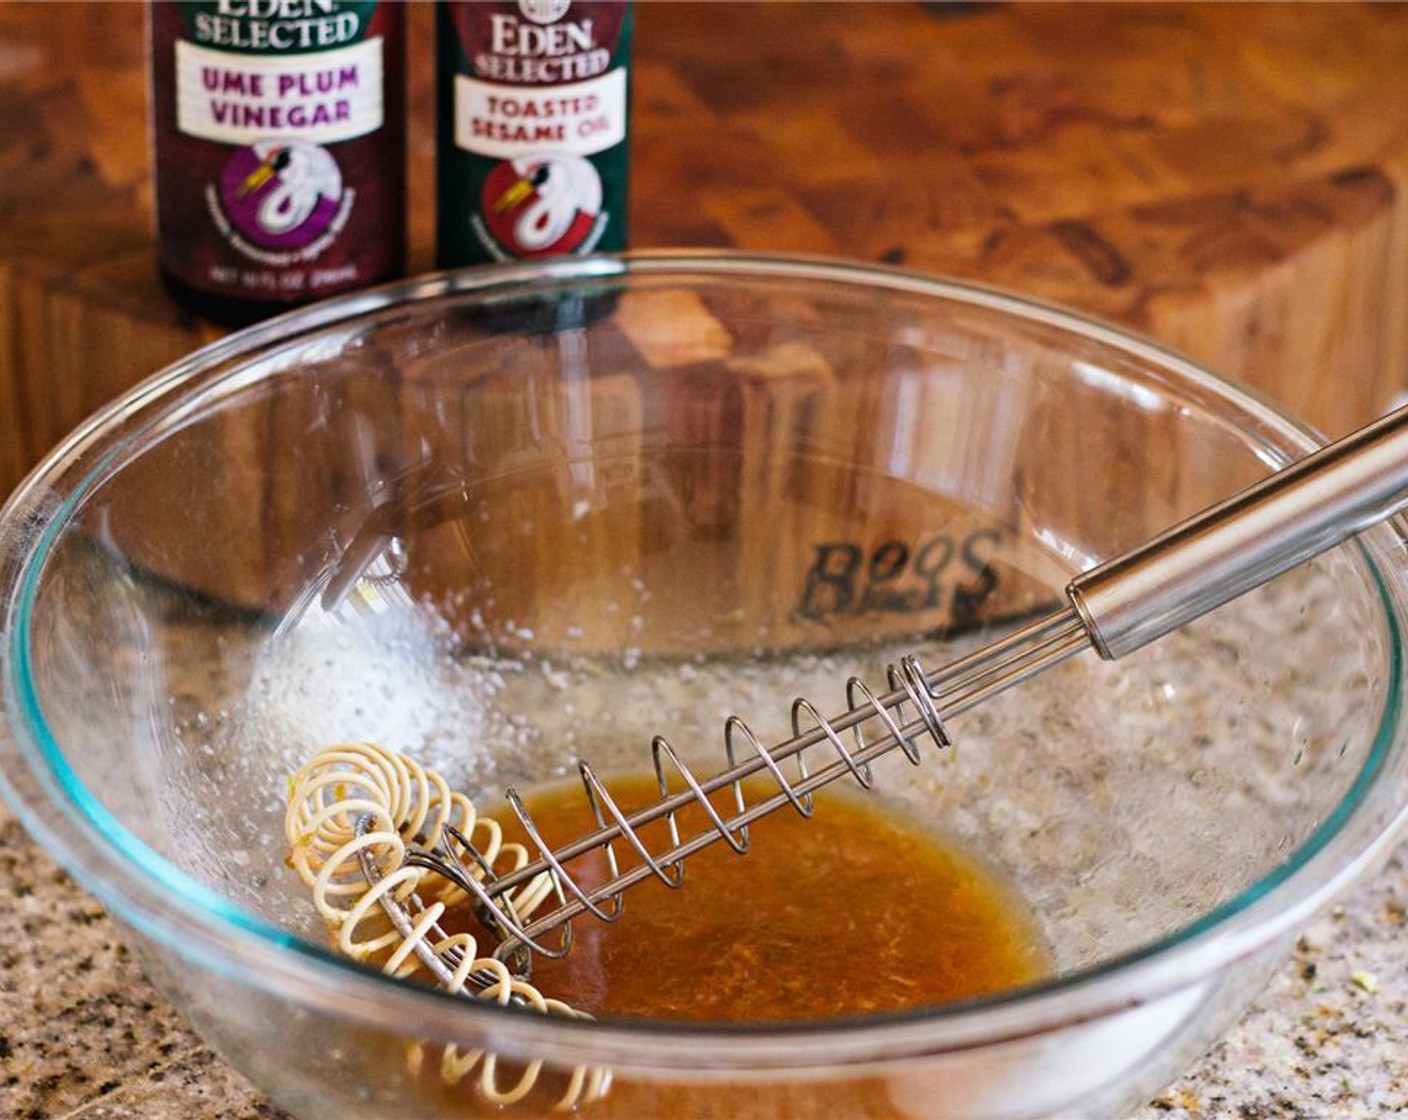 step 1 In a large bowl, thoroughly whisk the Ume Plum Vinegar (3 Tbsp), juice and zest of the Lime (1), Fresh Ginger (1 tsp), and Toasted Sesame Oil (1/4 cup).